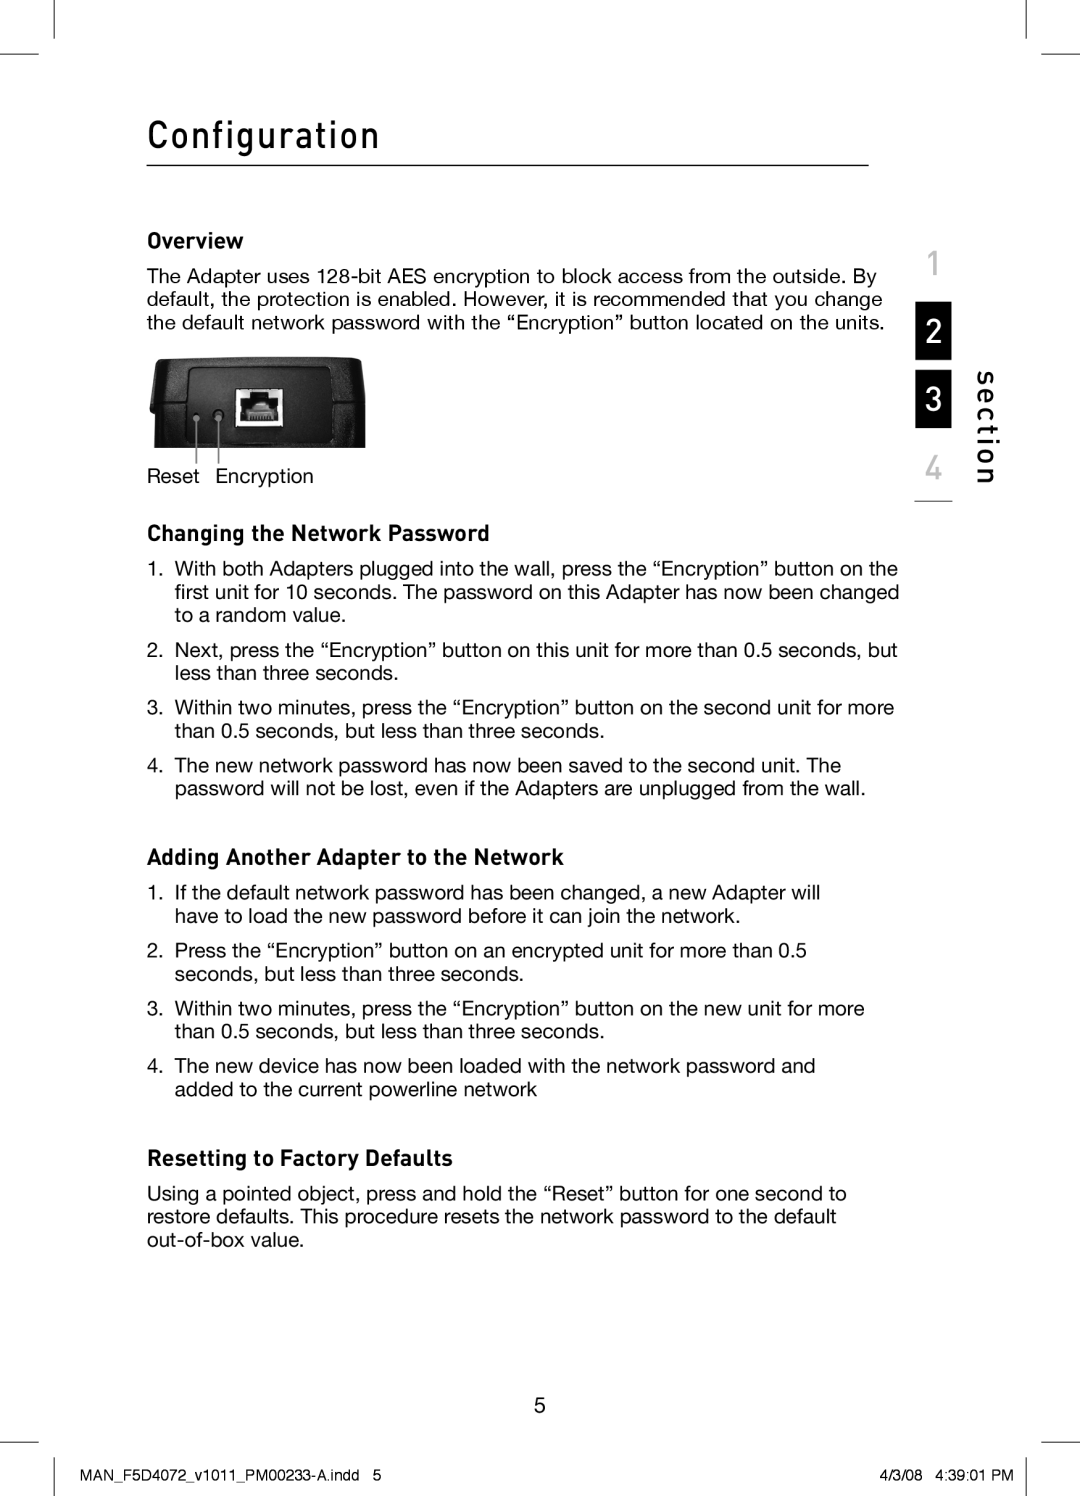 Belkin F5D4072 Configuration, Changing the Network Password, Adding Another Adapter to the Network, section, Overview 